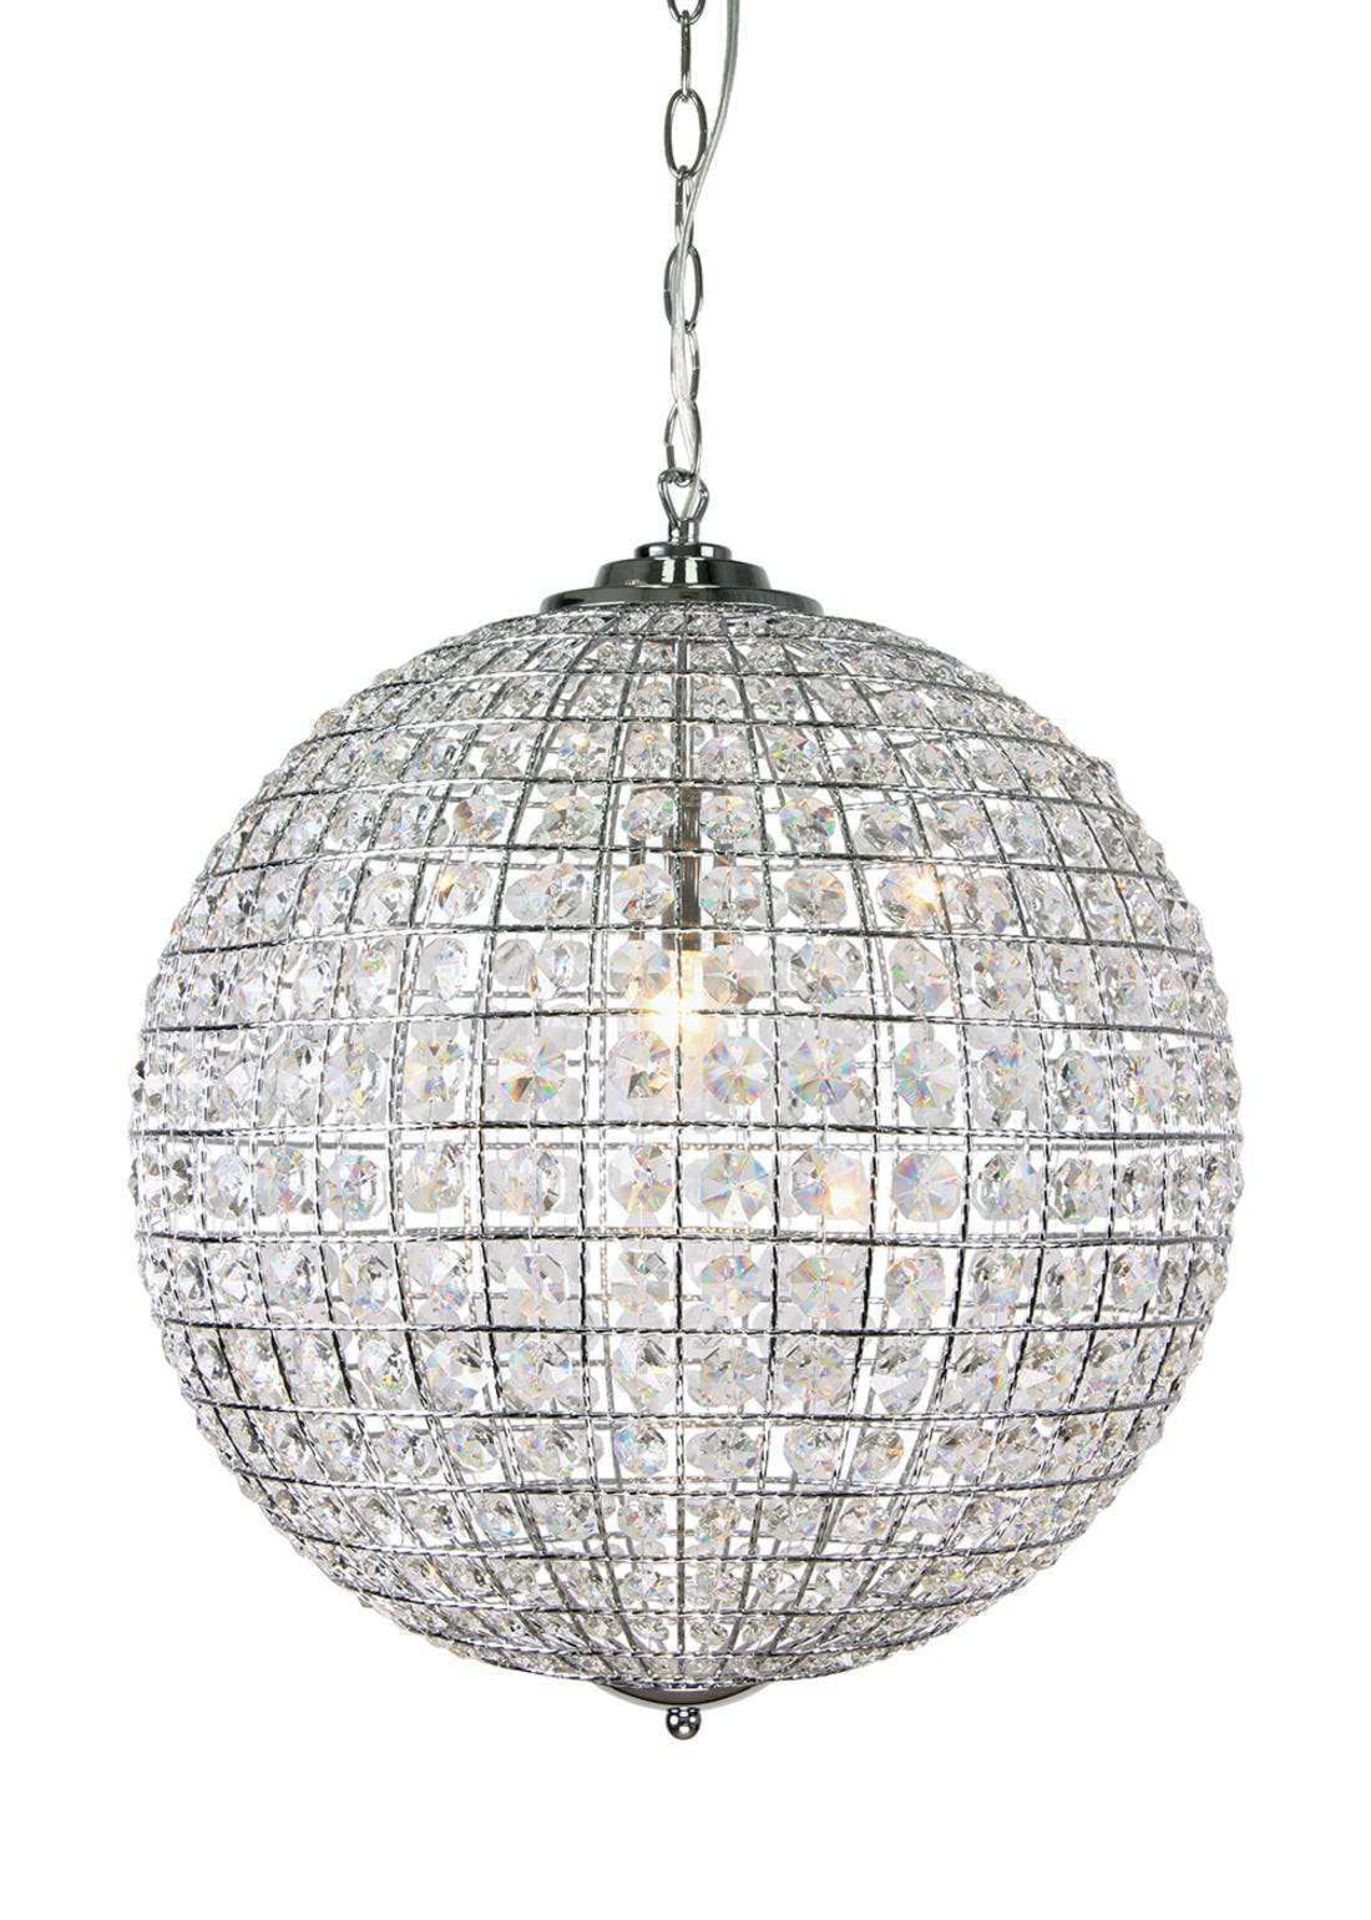 RRP £130 Boxed Melia Pendant Ceiling Light - Image 2 of 2